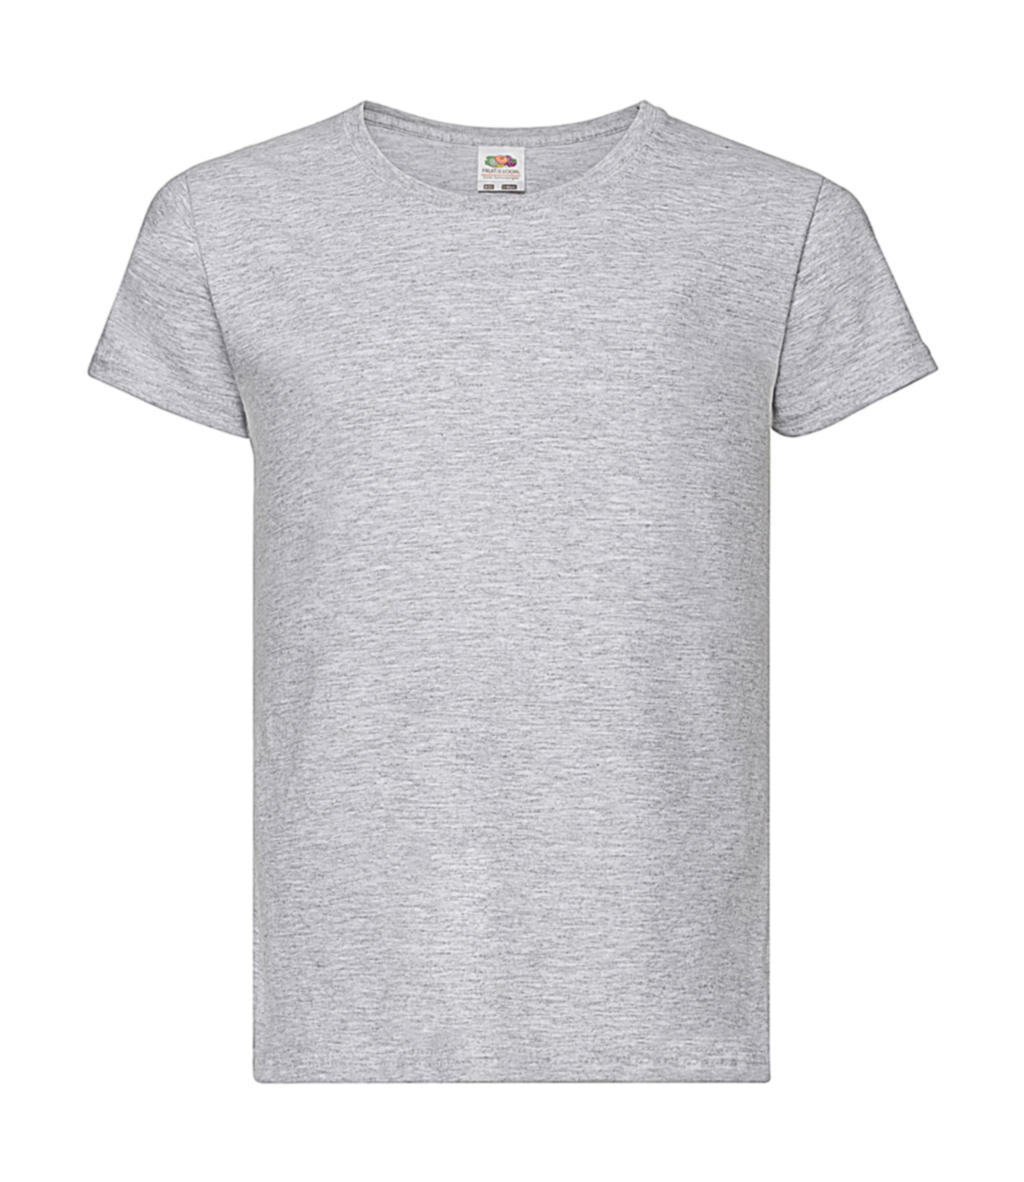  Girls Valueweight T in Farbe Heather Grey